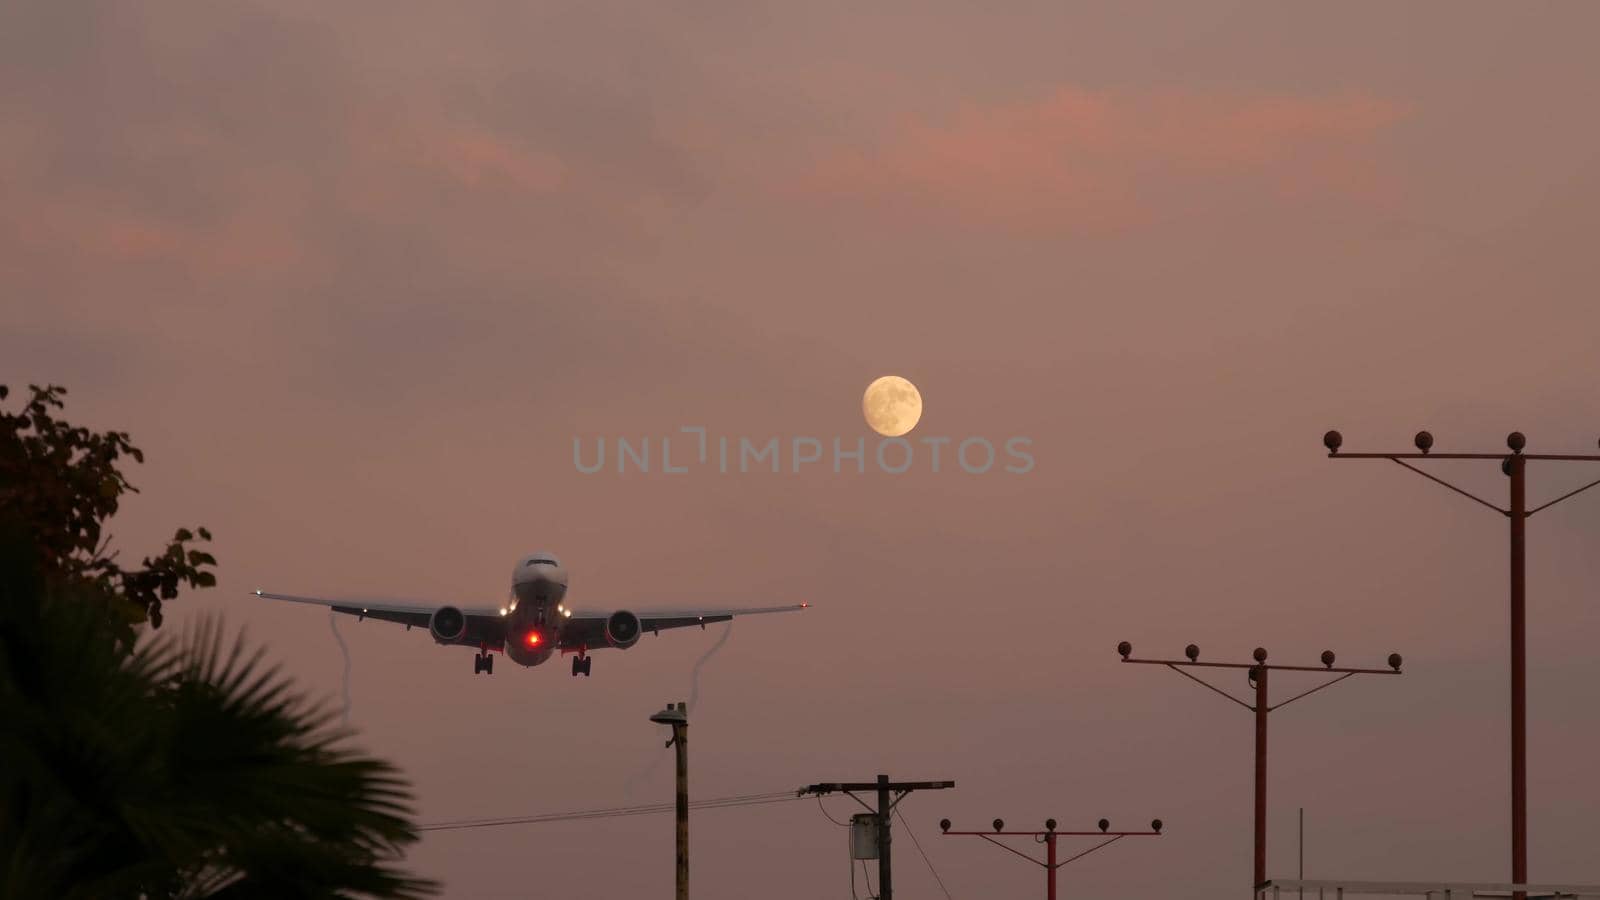 Airplane landing in LAX airport at sunset, Los Angeles, California USA. Passenger flight or cargo plane silhouette, dramatic cloudscape. Aircraft arrival to airfield. International transport flying by DogoraSun